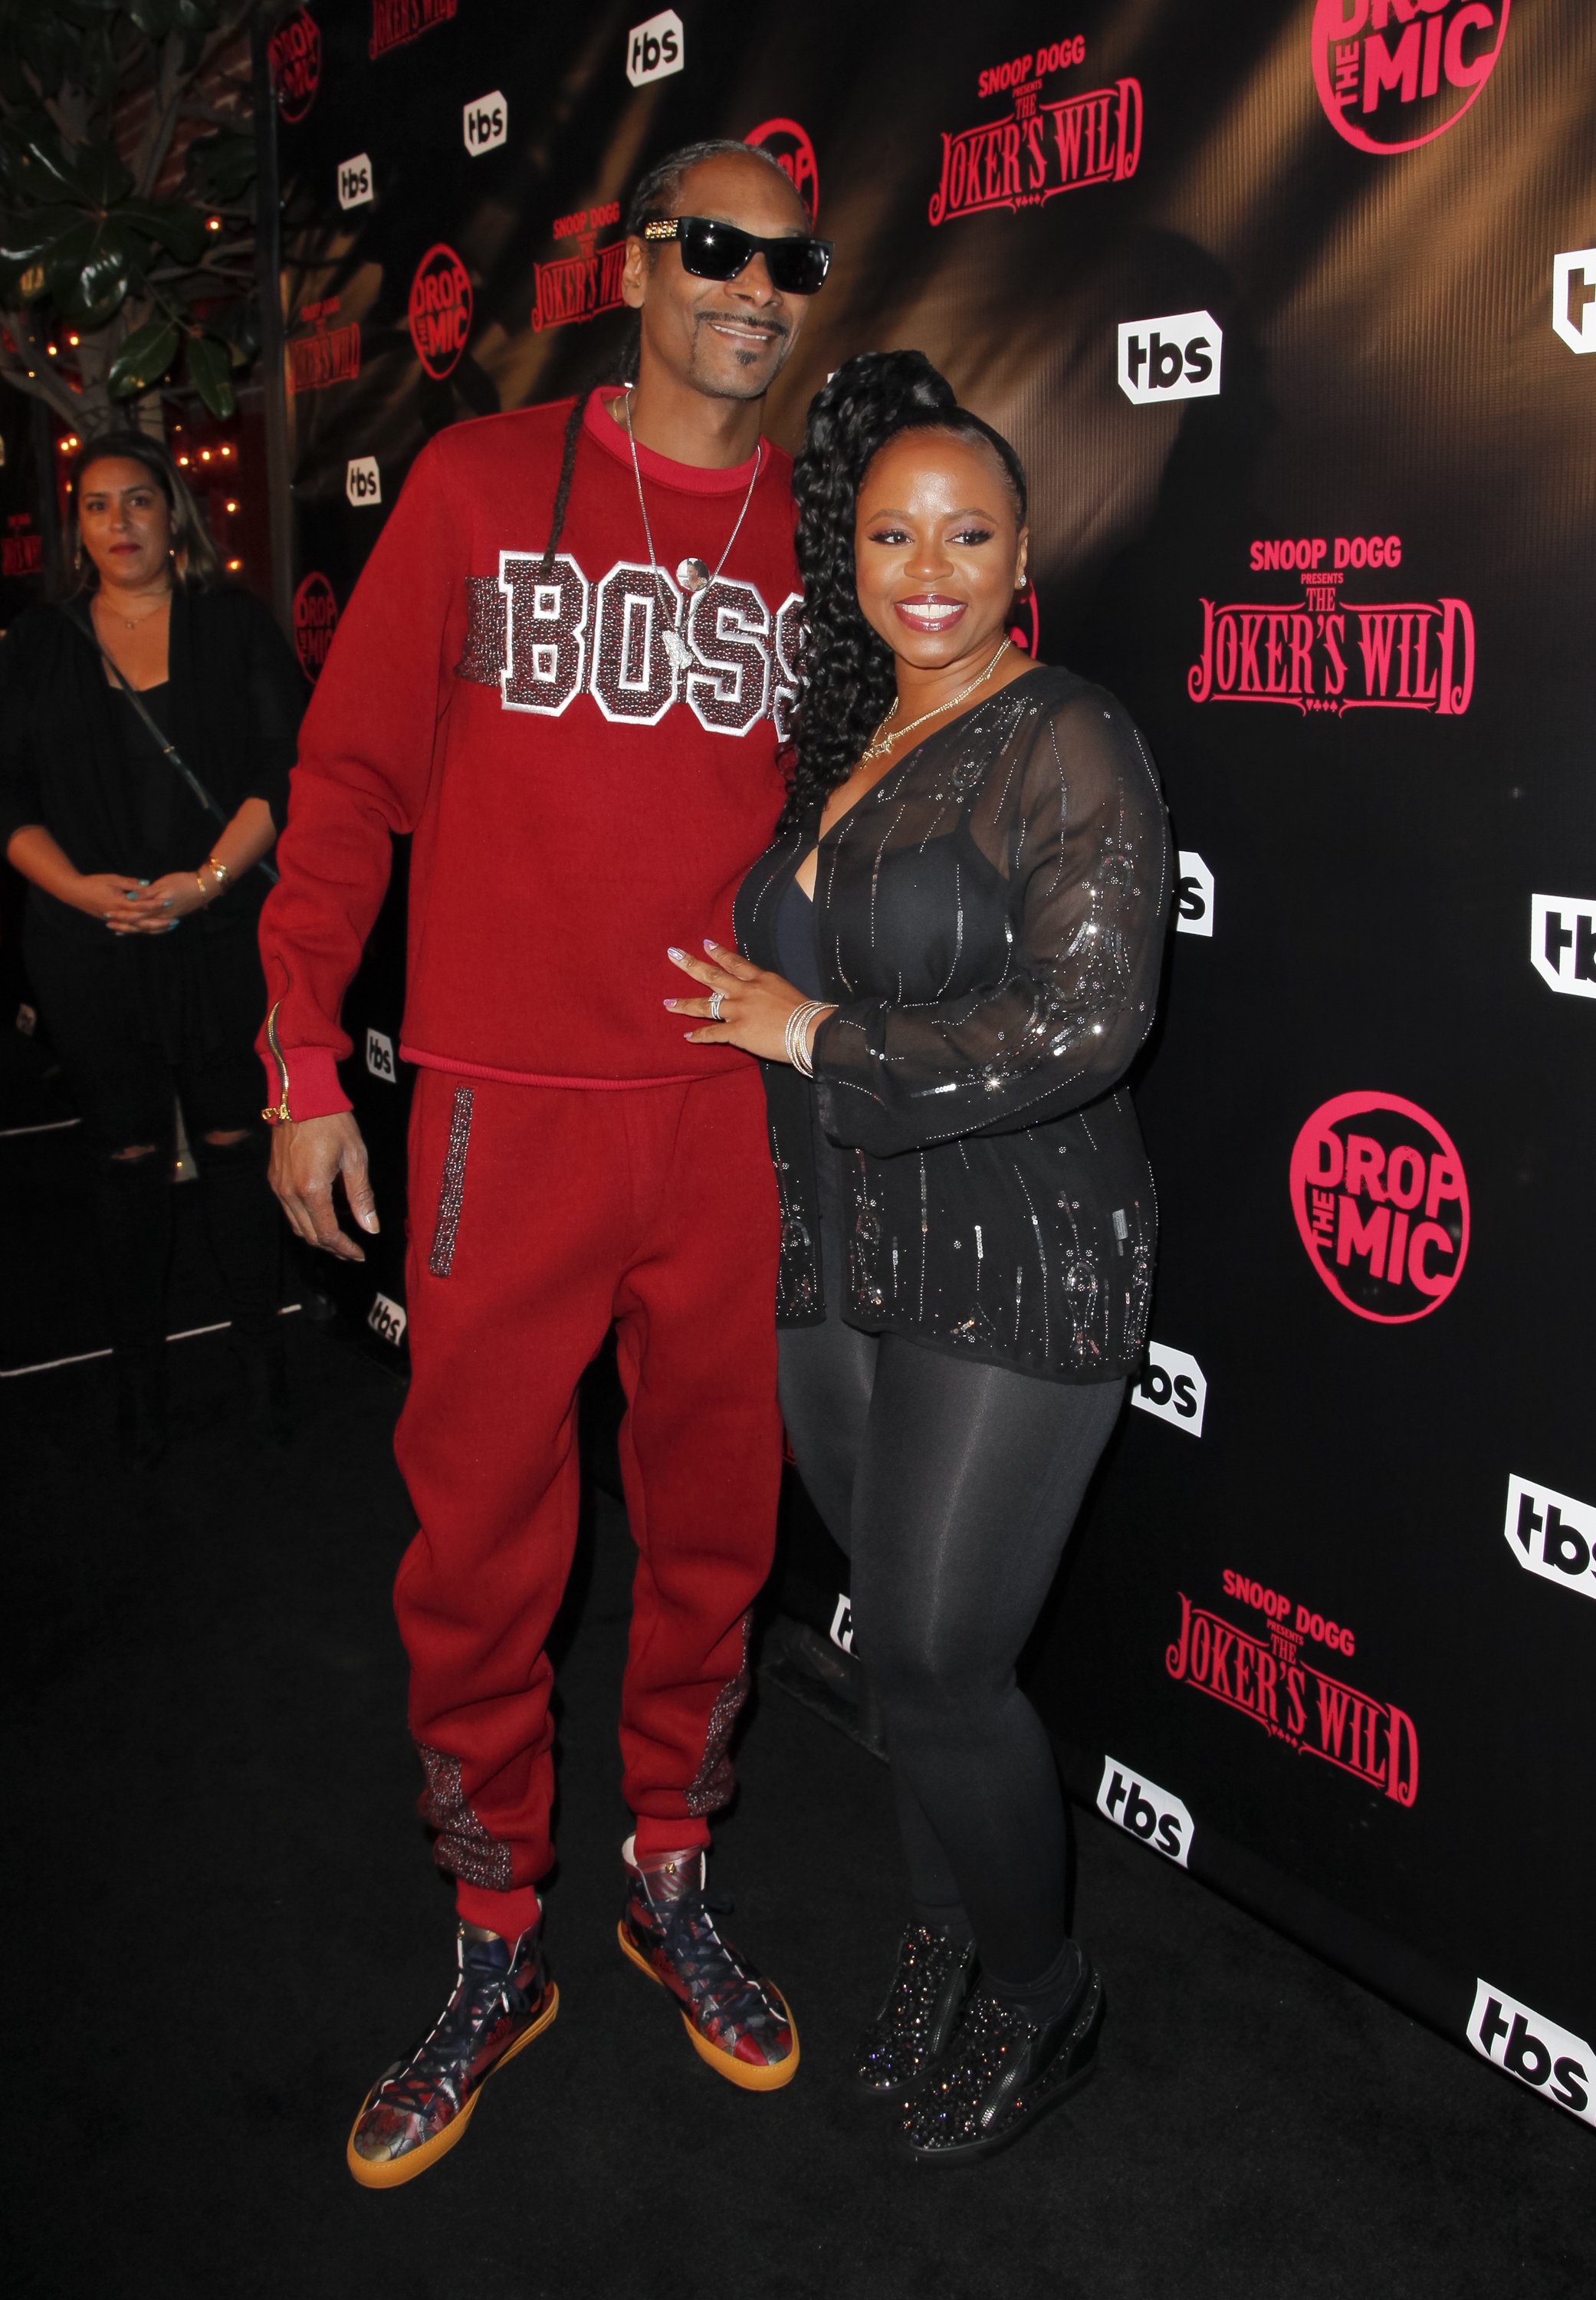 Snoop Dogg and Shante Broadus during the premiere of  TBS's "Drop The Mic" and "The Joker's Wild" at The Highlight Room on October 11, 2017. | Photo: Getty Images